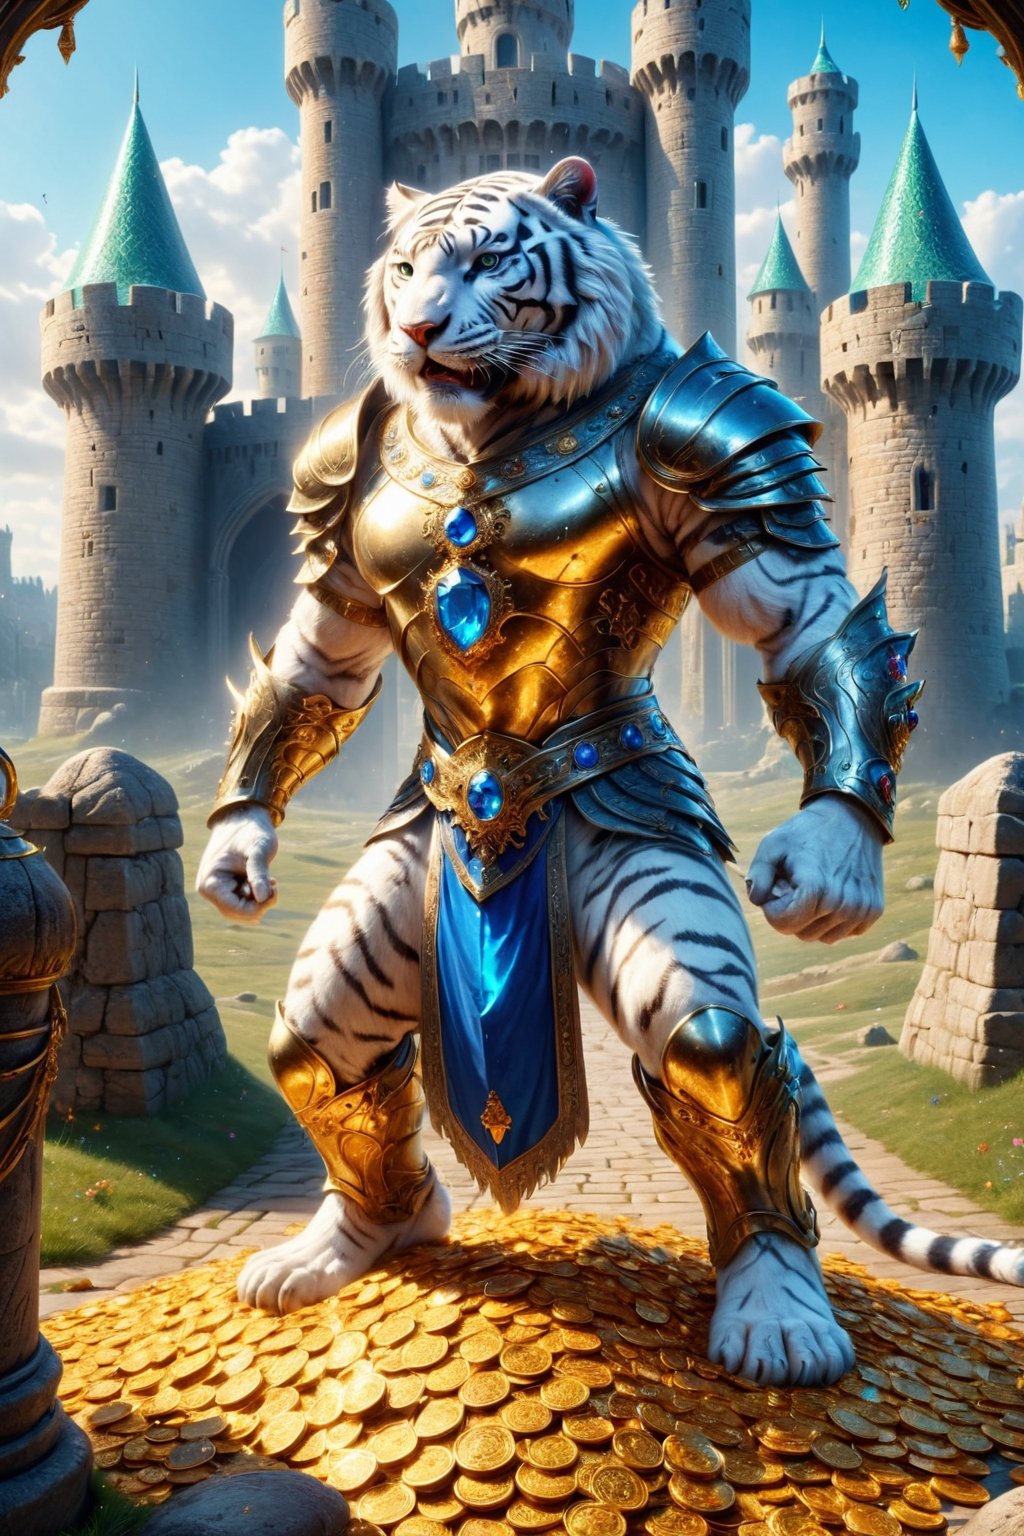 REALISTIC
It is daytime and we see the full body image of a tall and muscular white human tiger warrior with armor and sword standing on gold coins and on jewels, emeralds, rubies, sapphires, diamonds, in front of him a golden path full of chests of treasure and jewels and behind a beautiful and fantastic castle, background of a beautiful castle with flags with the letter H, the tall and muscular white human tiger warrior has a blue fire sword in his right hand and has a light blue armor and a red medallion on his chest, in his left hand a bag full of gold, treasure chests full of gold and jewels. The strong lighting from the bright sun makes the gold shine on the ground, the castle in the background looks fantastic and is full of flags with the letter H.